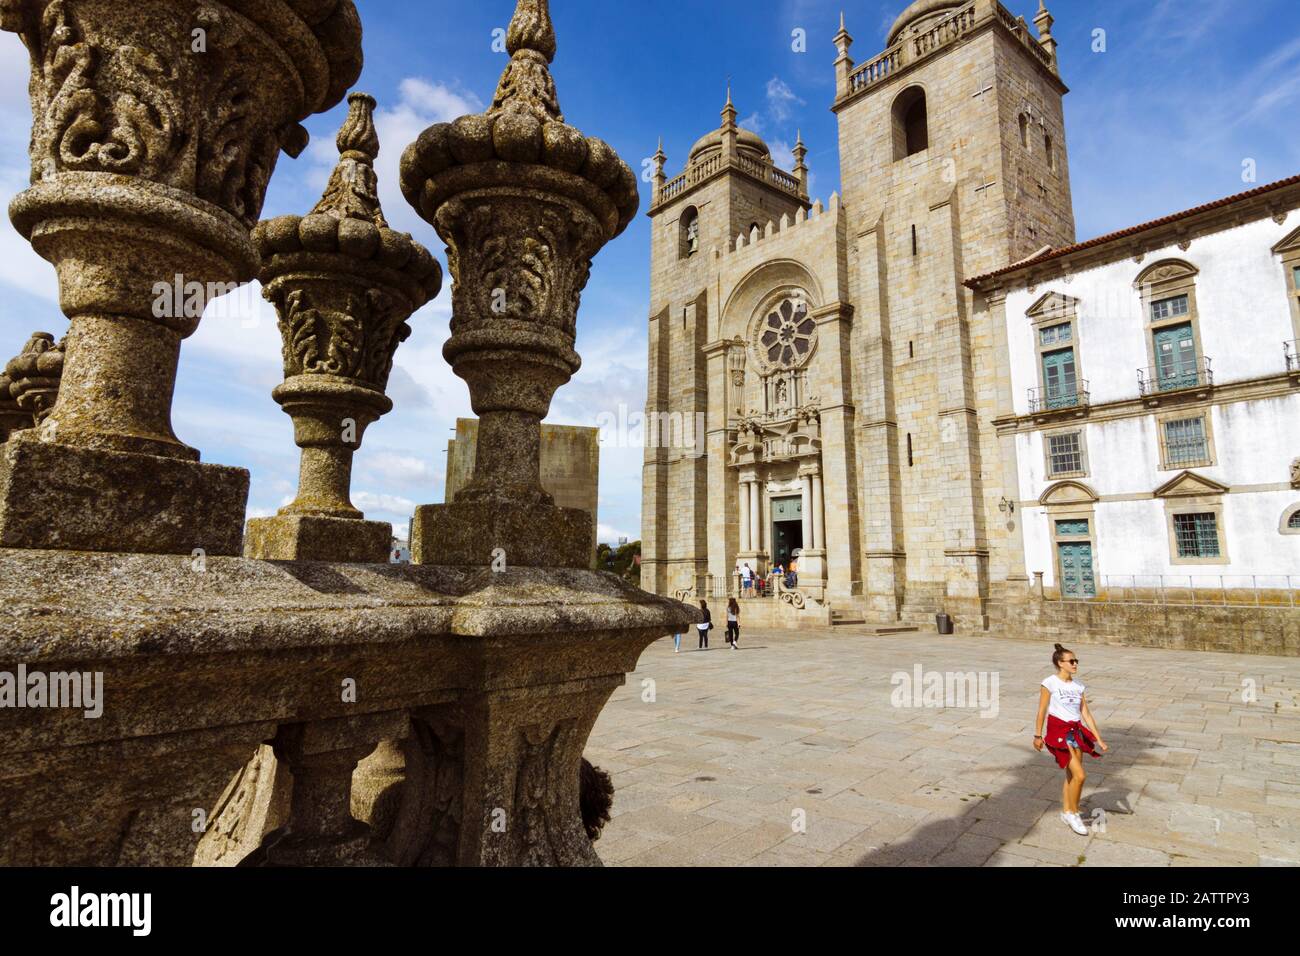 Porto, Portugal : A young woman walks past the Porto Cathedral, built in the 12th century, with Baroque and 20th century modifications. Stock Photo